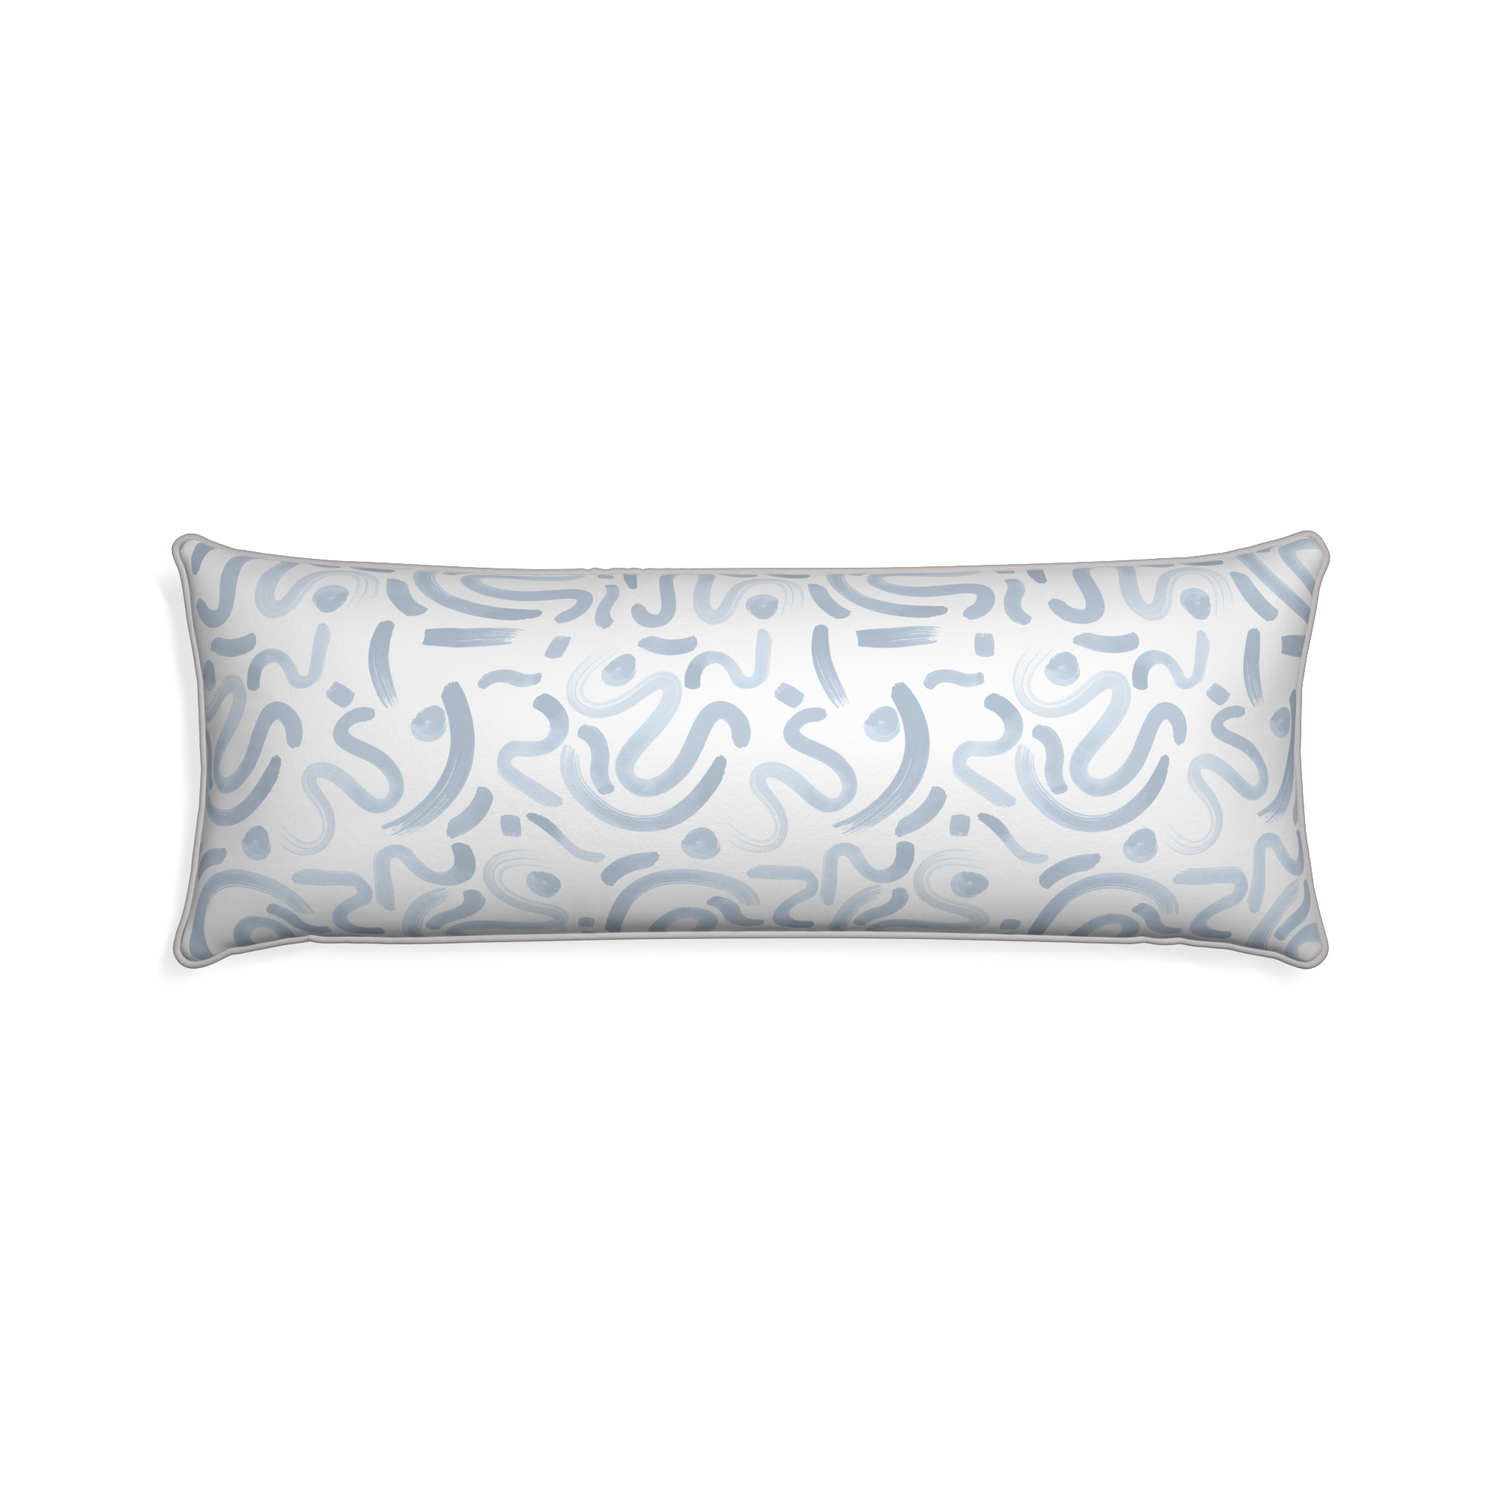 Xl-lumbar hockney sky custom pillow with pebble piping on white background